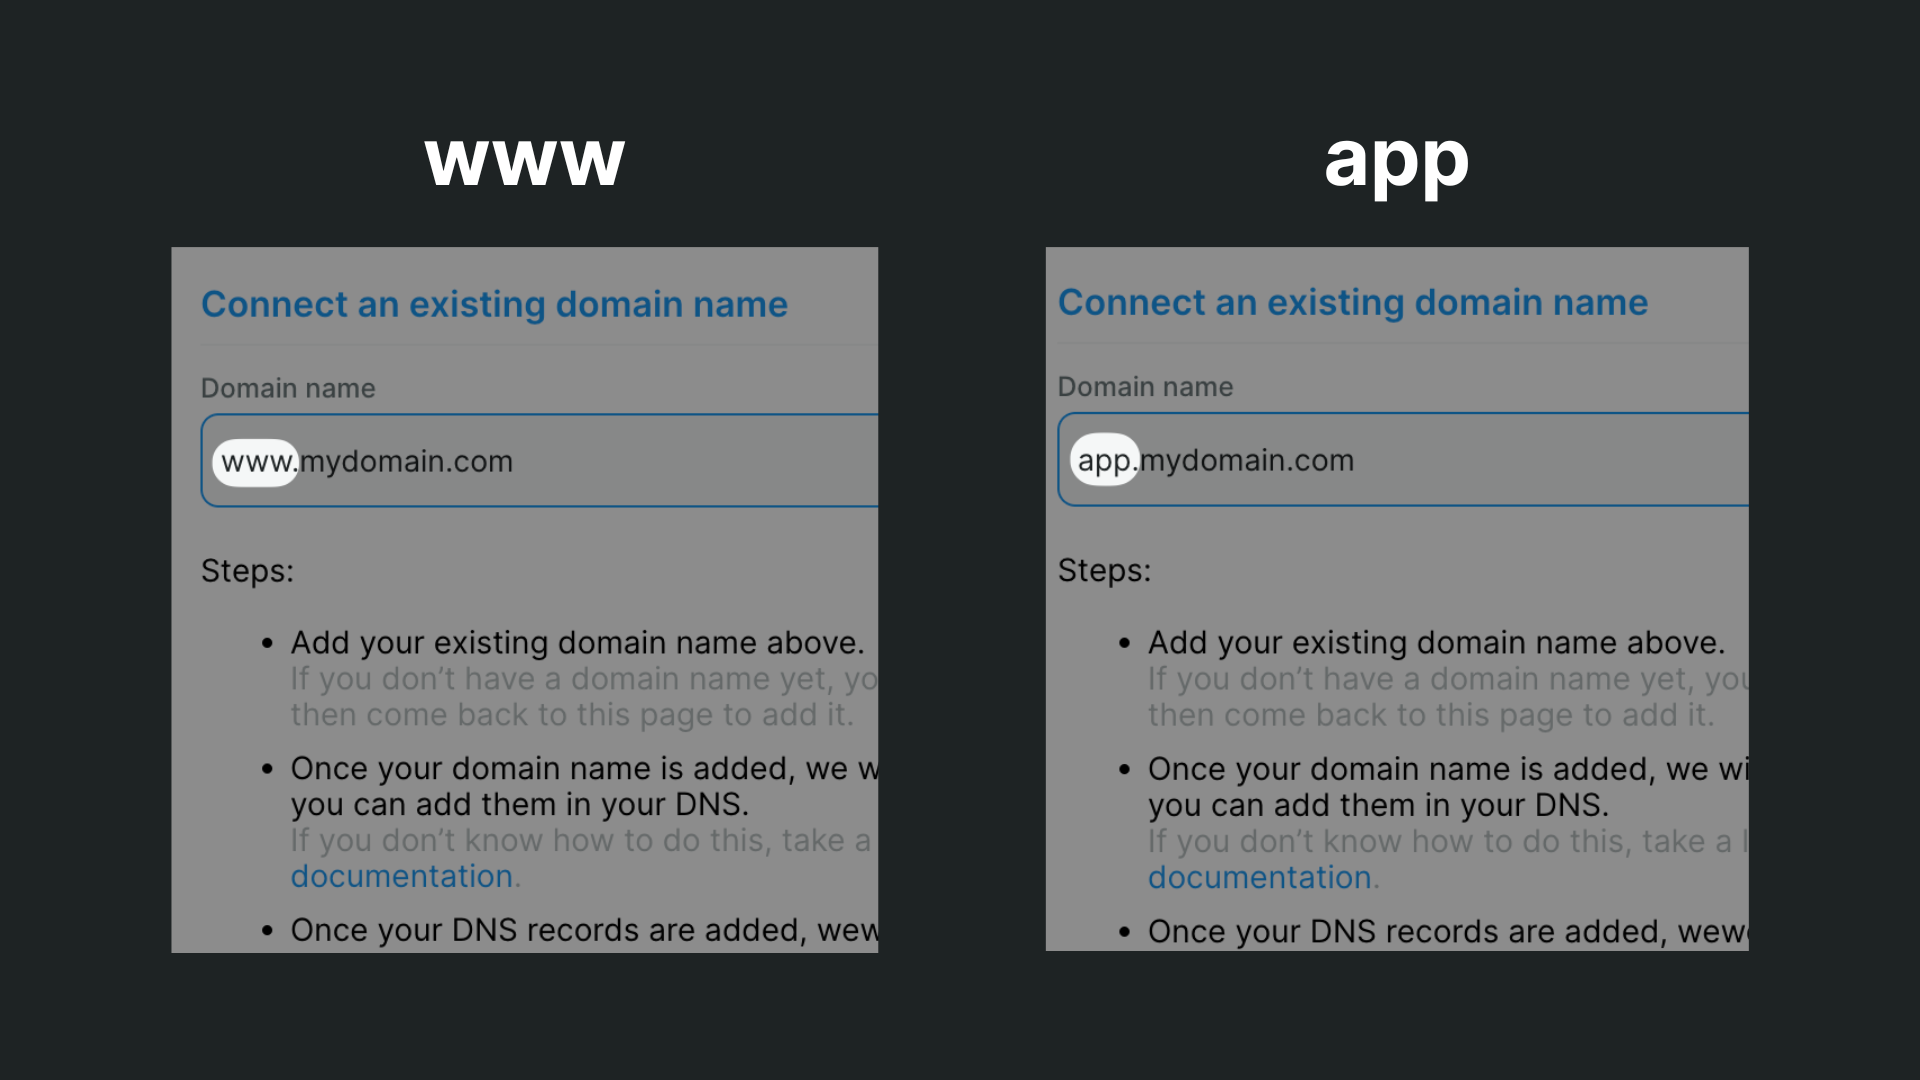 Two subdomain examples